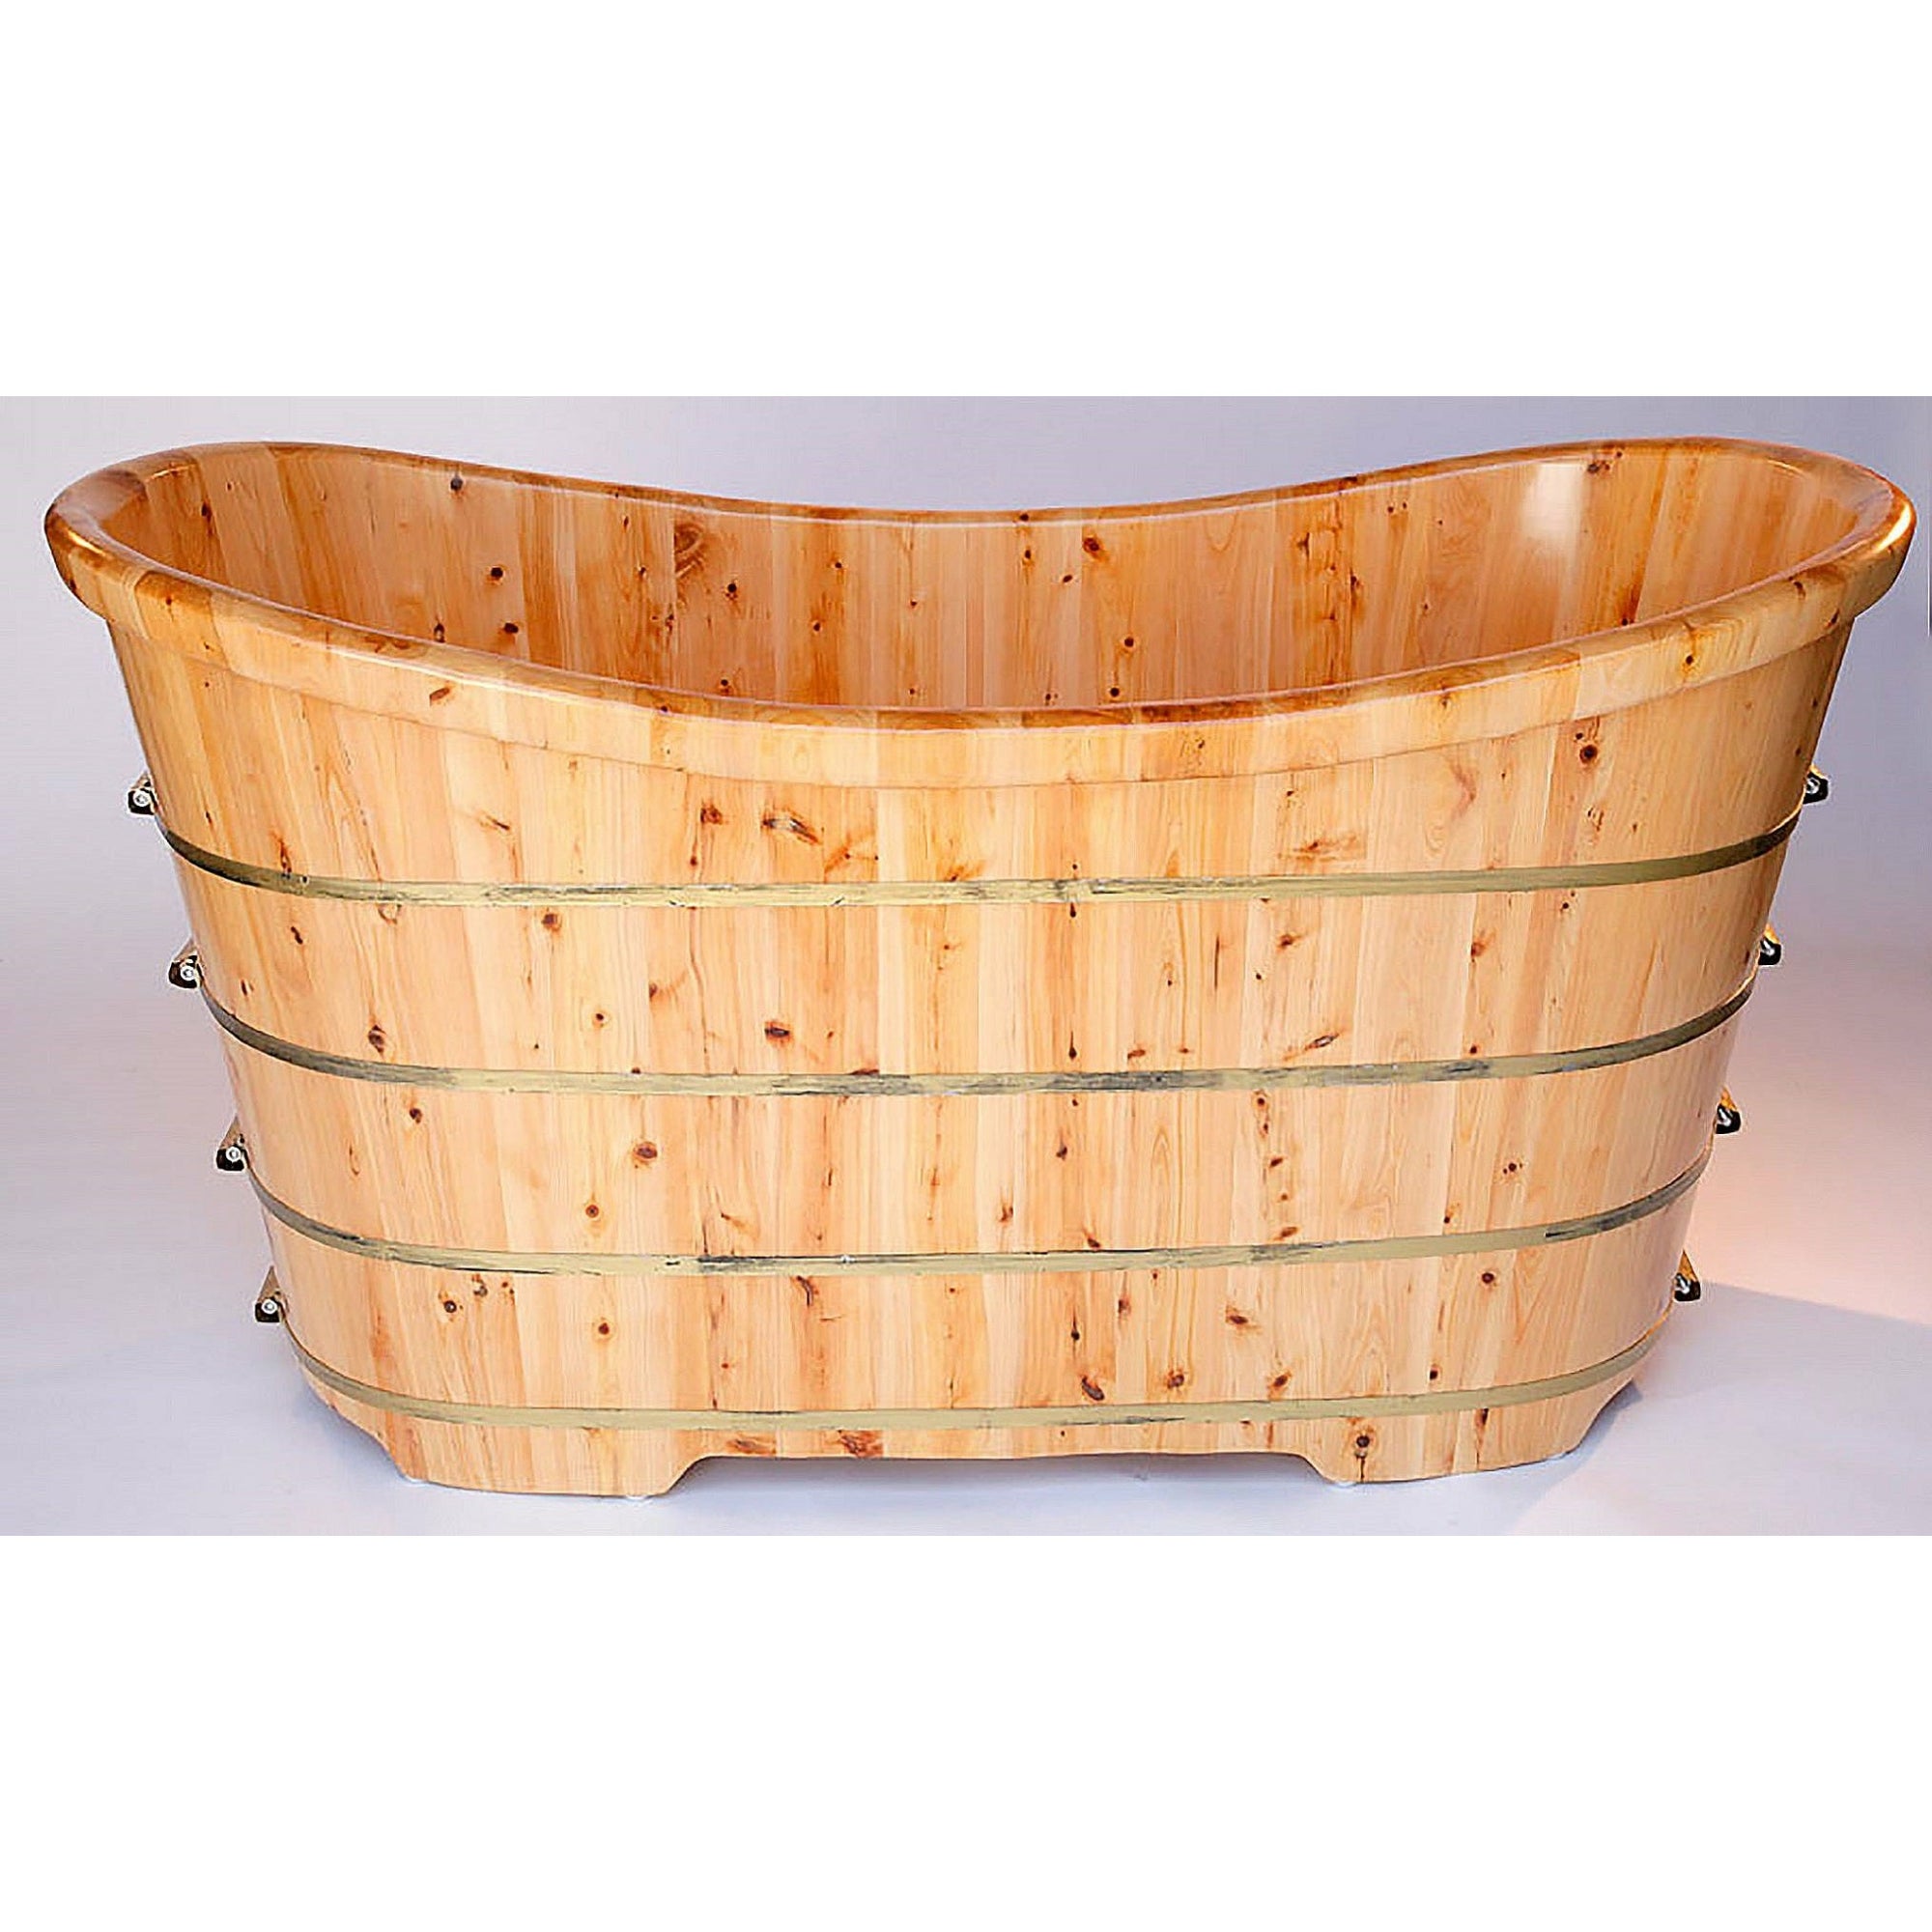 ALFI AB1105 63" Free Standing Cedar Wooden Bathtub - four electroplated iron wraps with black and gold paint - 2 person capacity in a white background